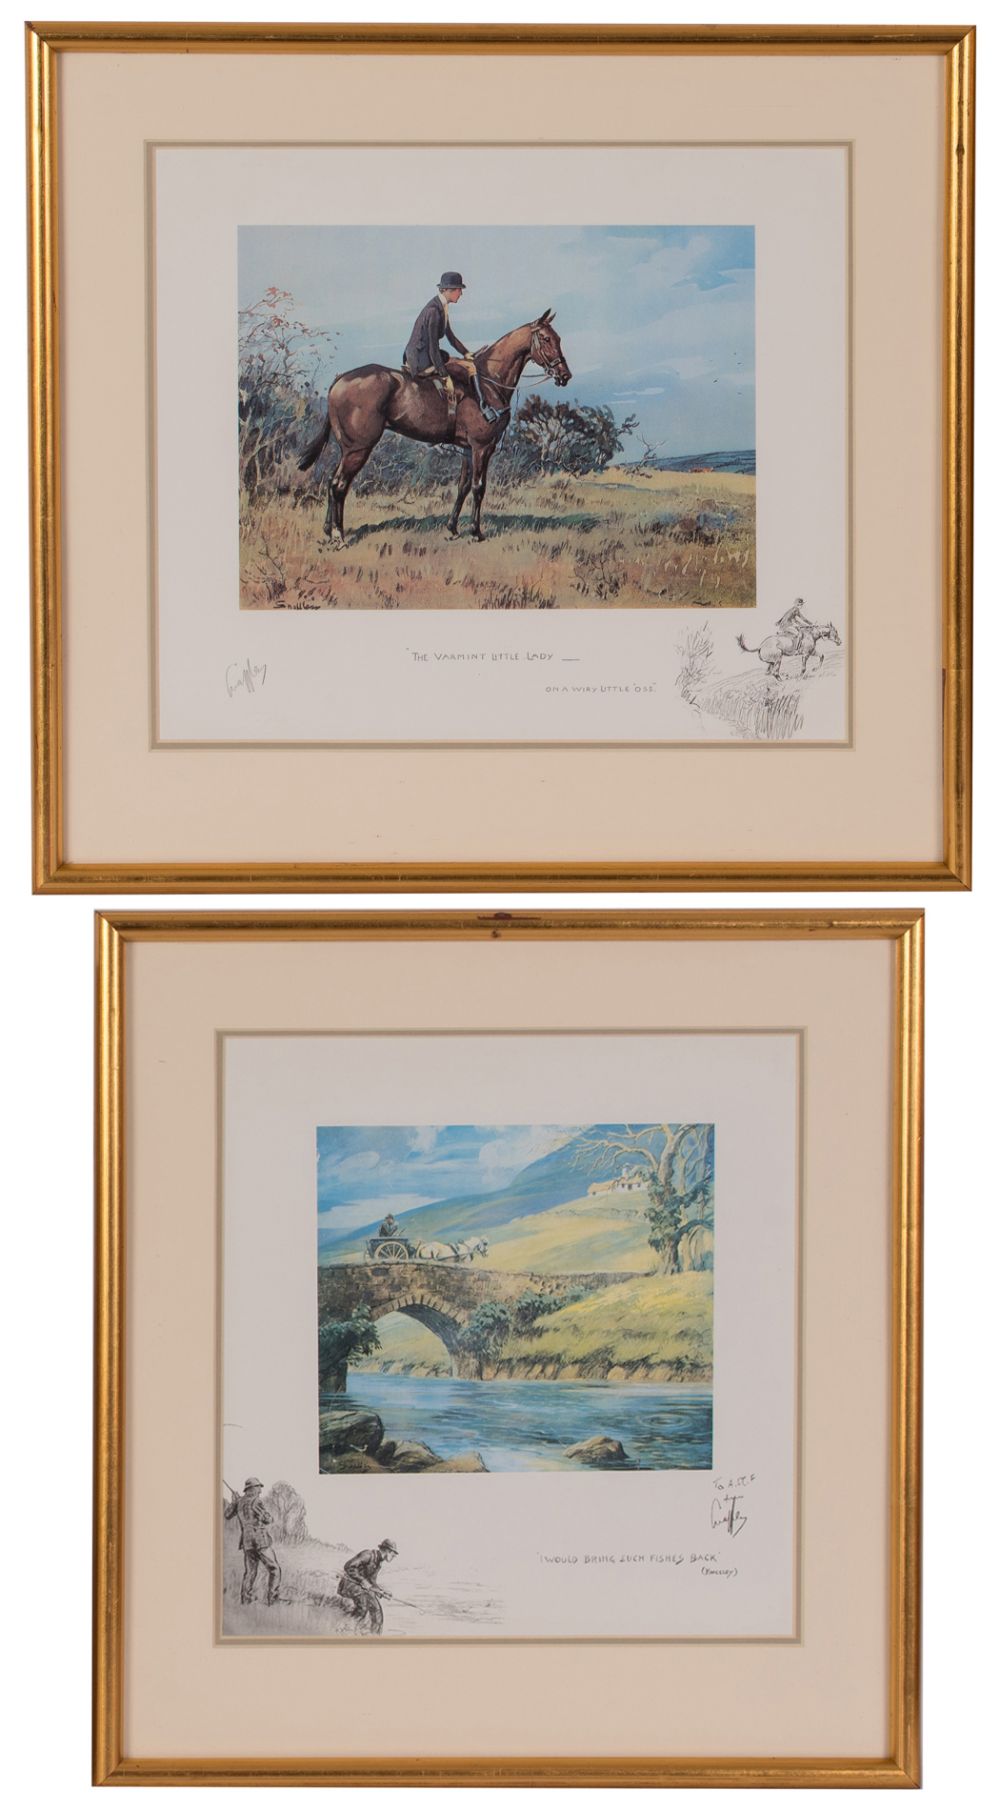 Pair of Snaffles Prints at Dolan's Art Auction House